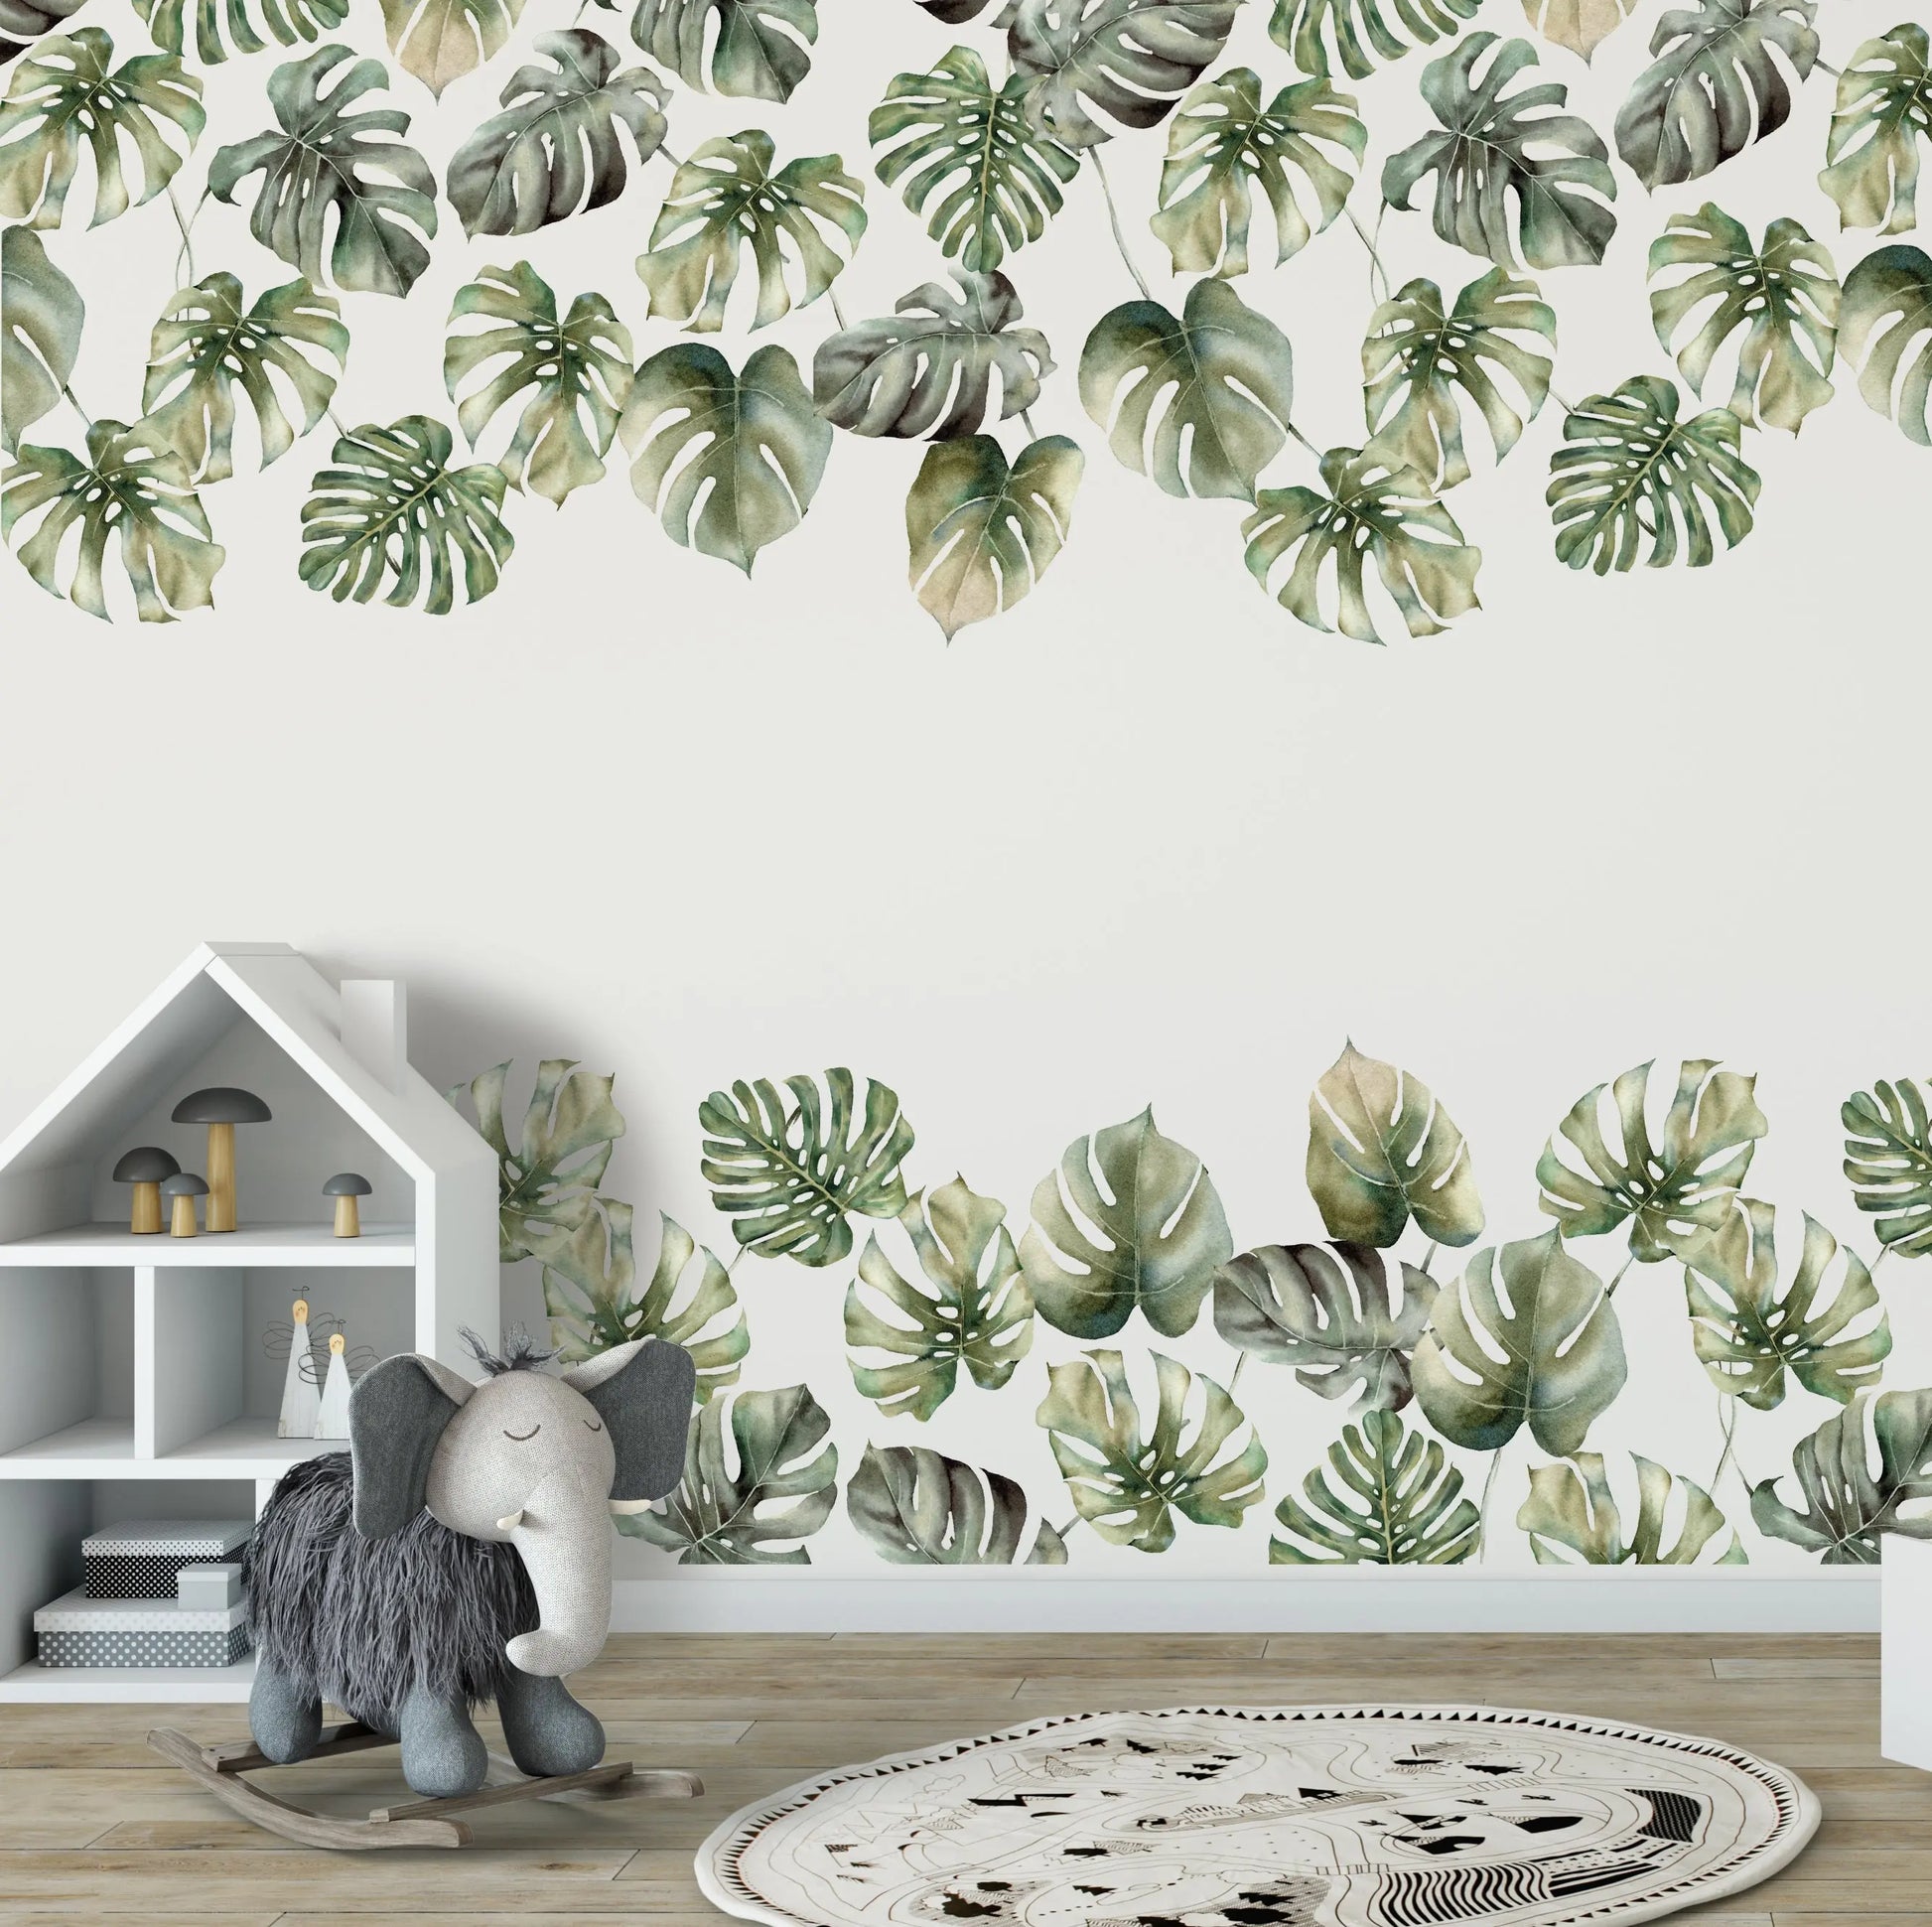 Wall Decal Copy of Jungle Leaf Wall Decal Dizzy Duck Designs